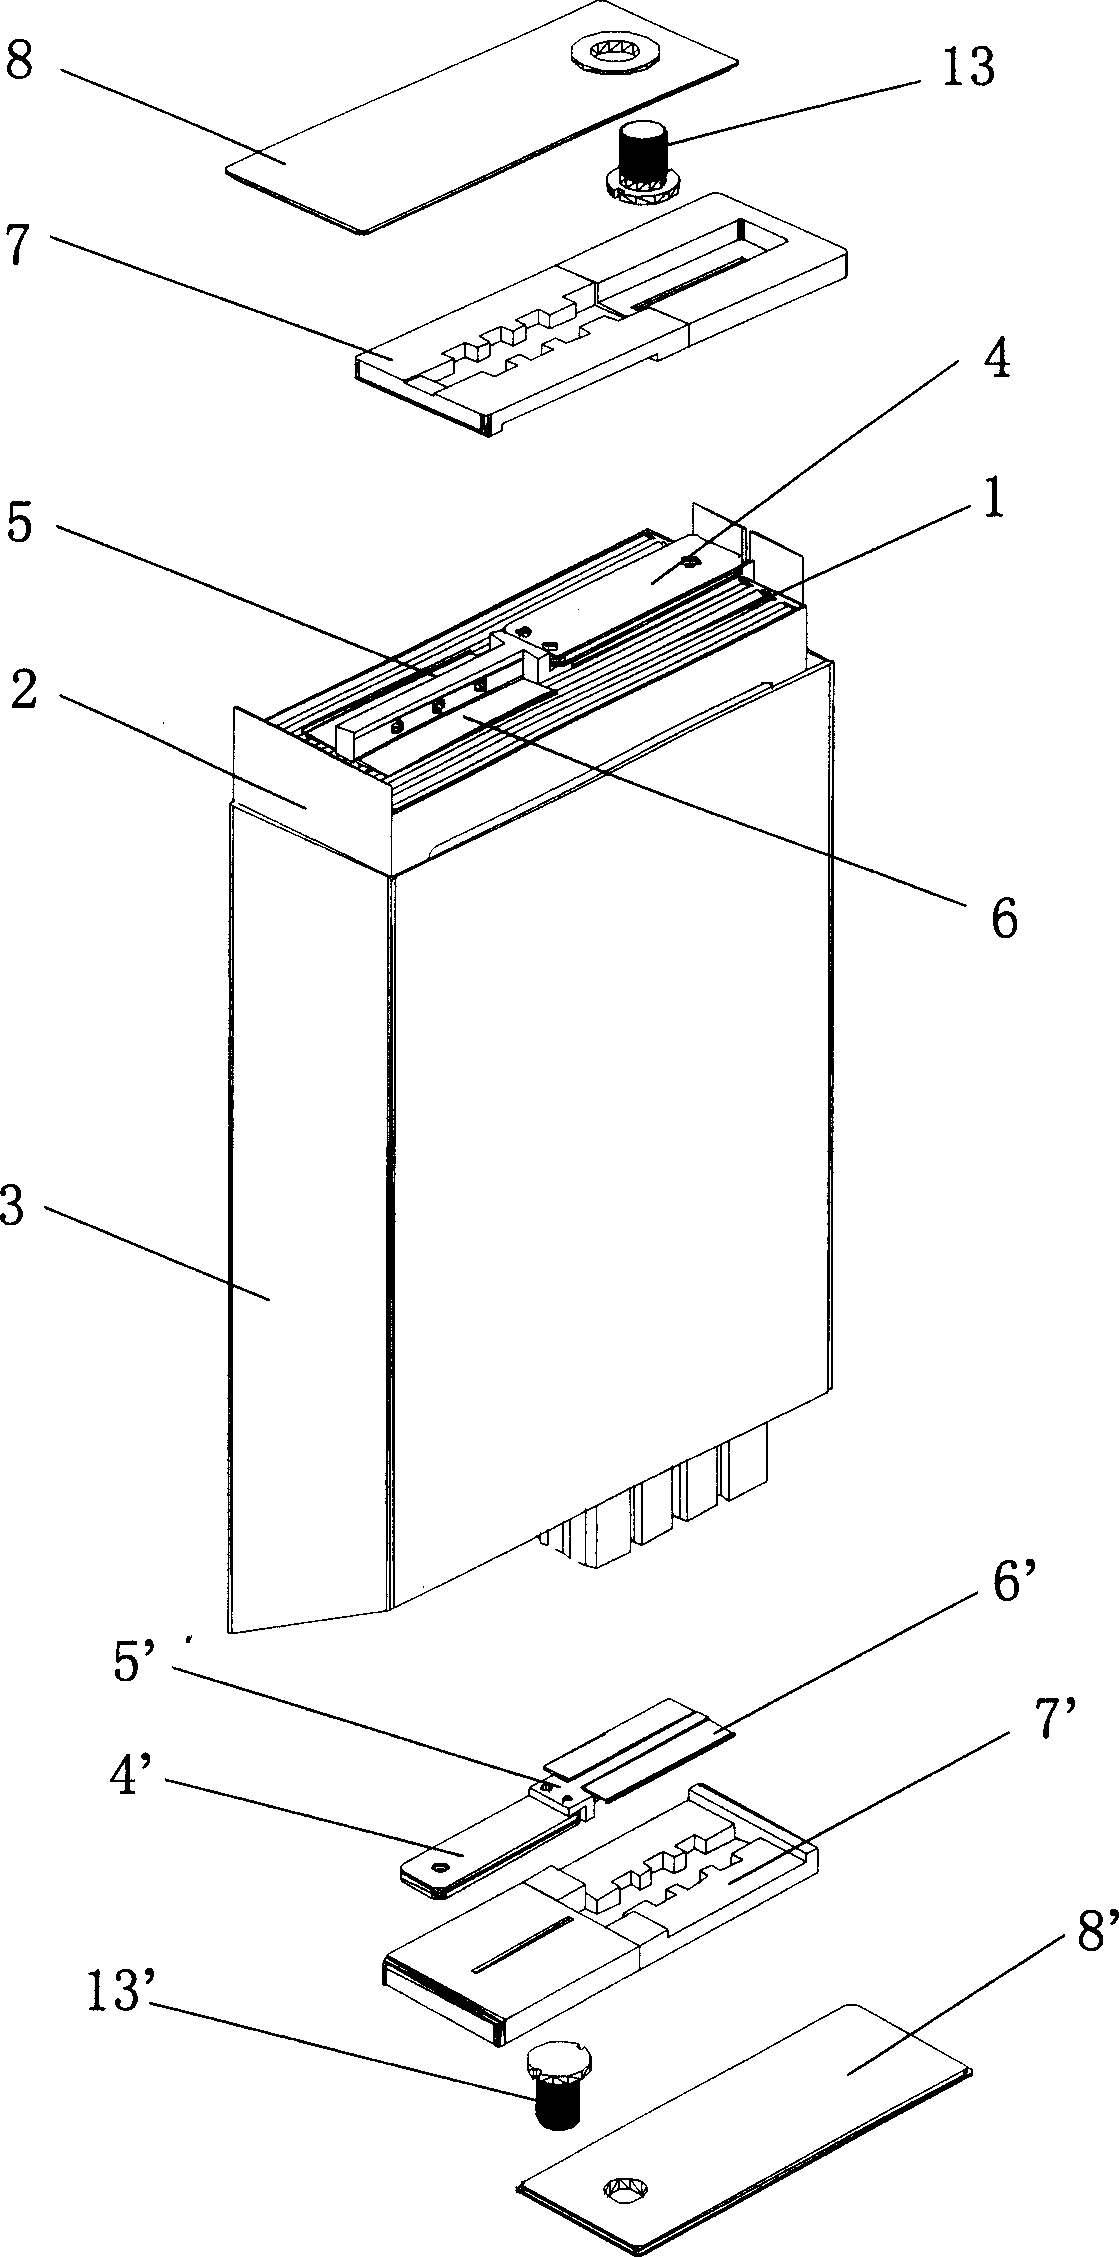 Lithium ion secondary cell